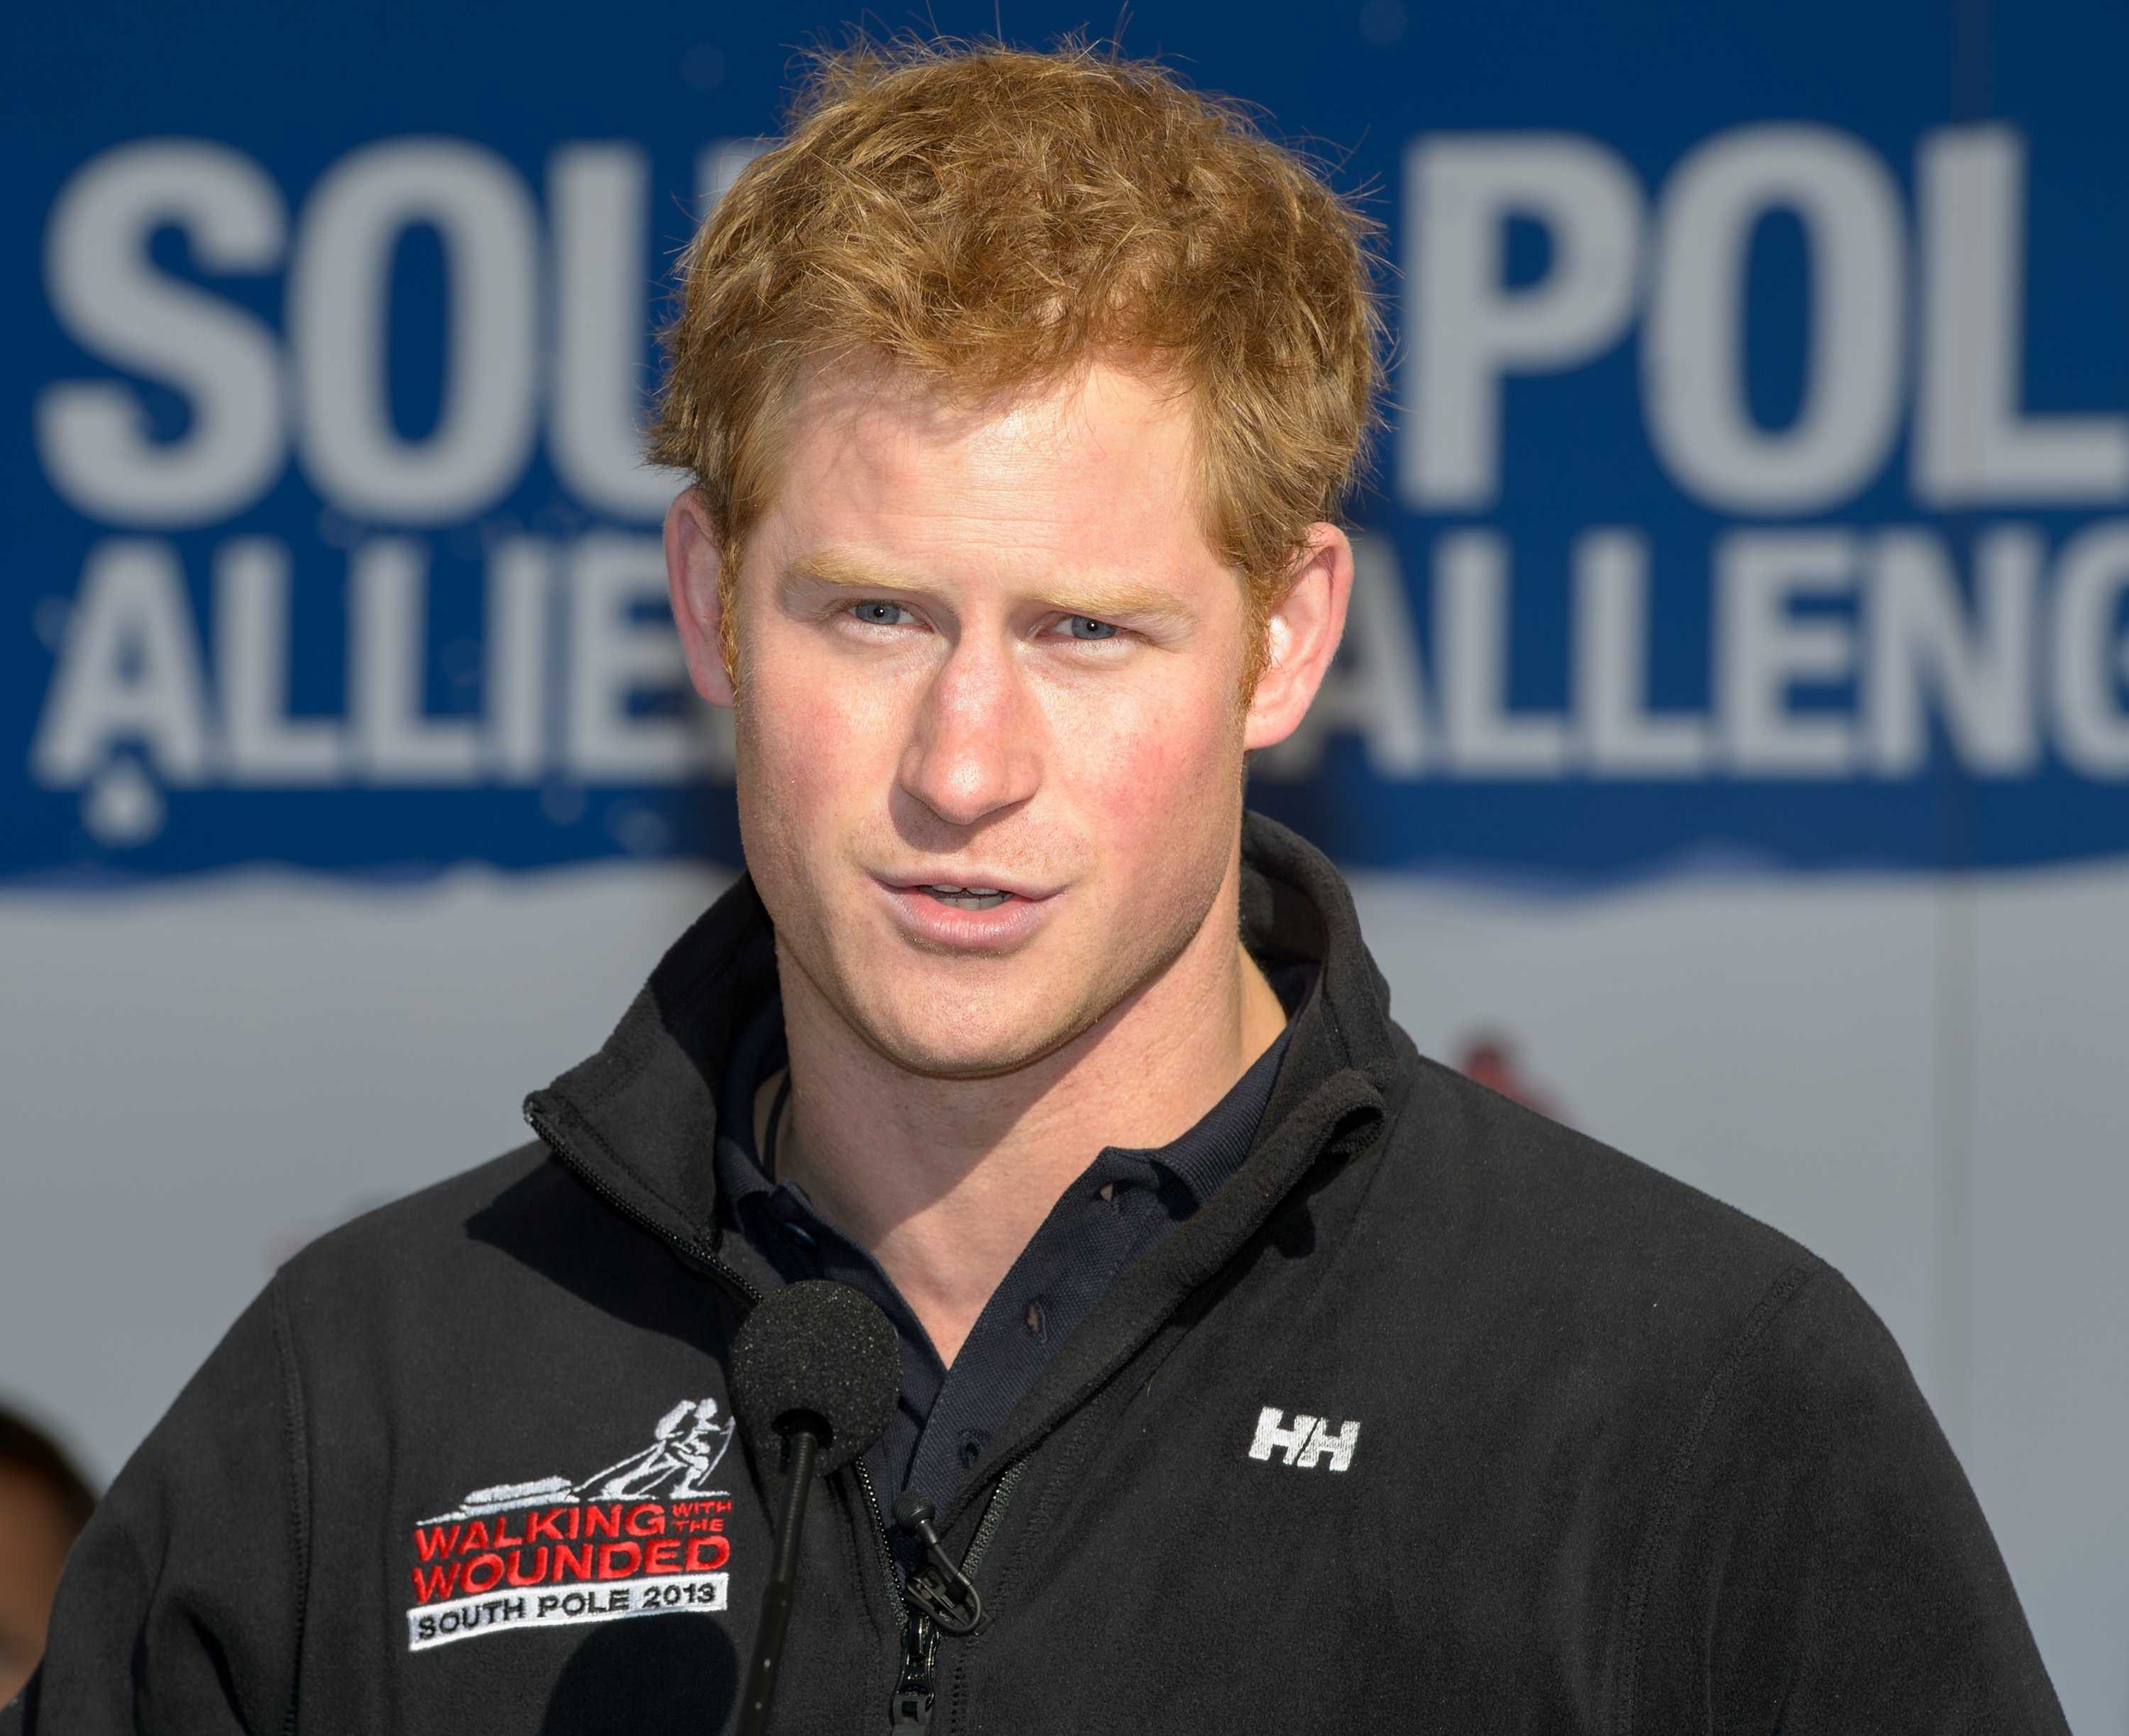 Prince Harry: No royal wants to be king or queen